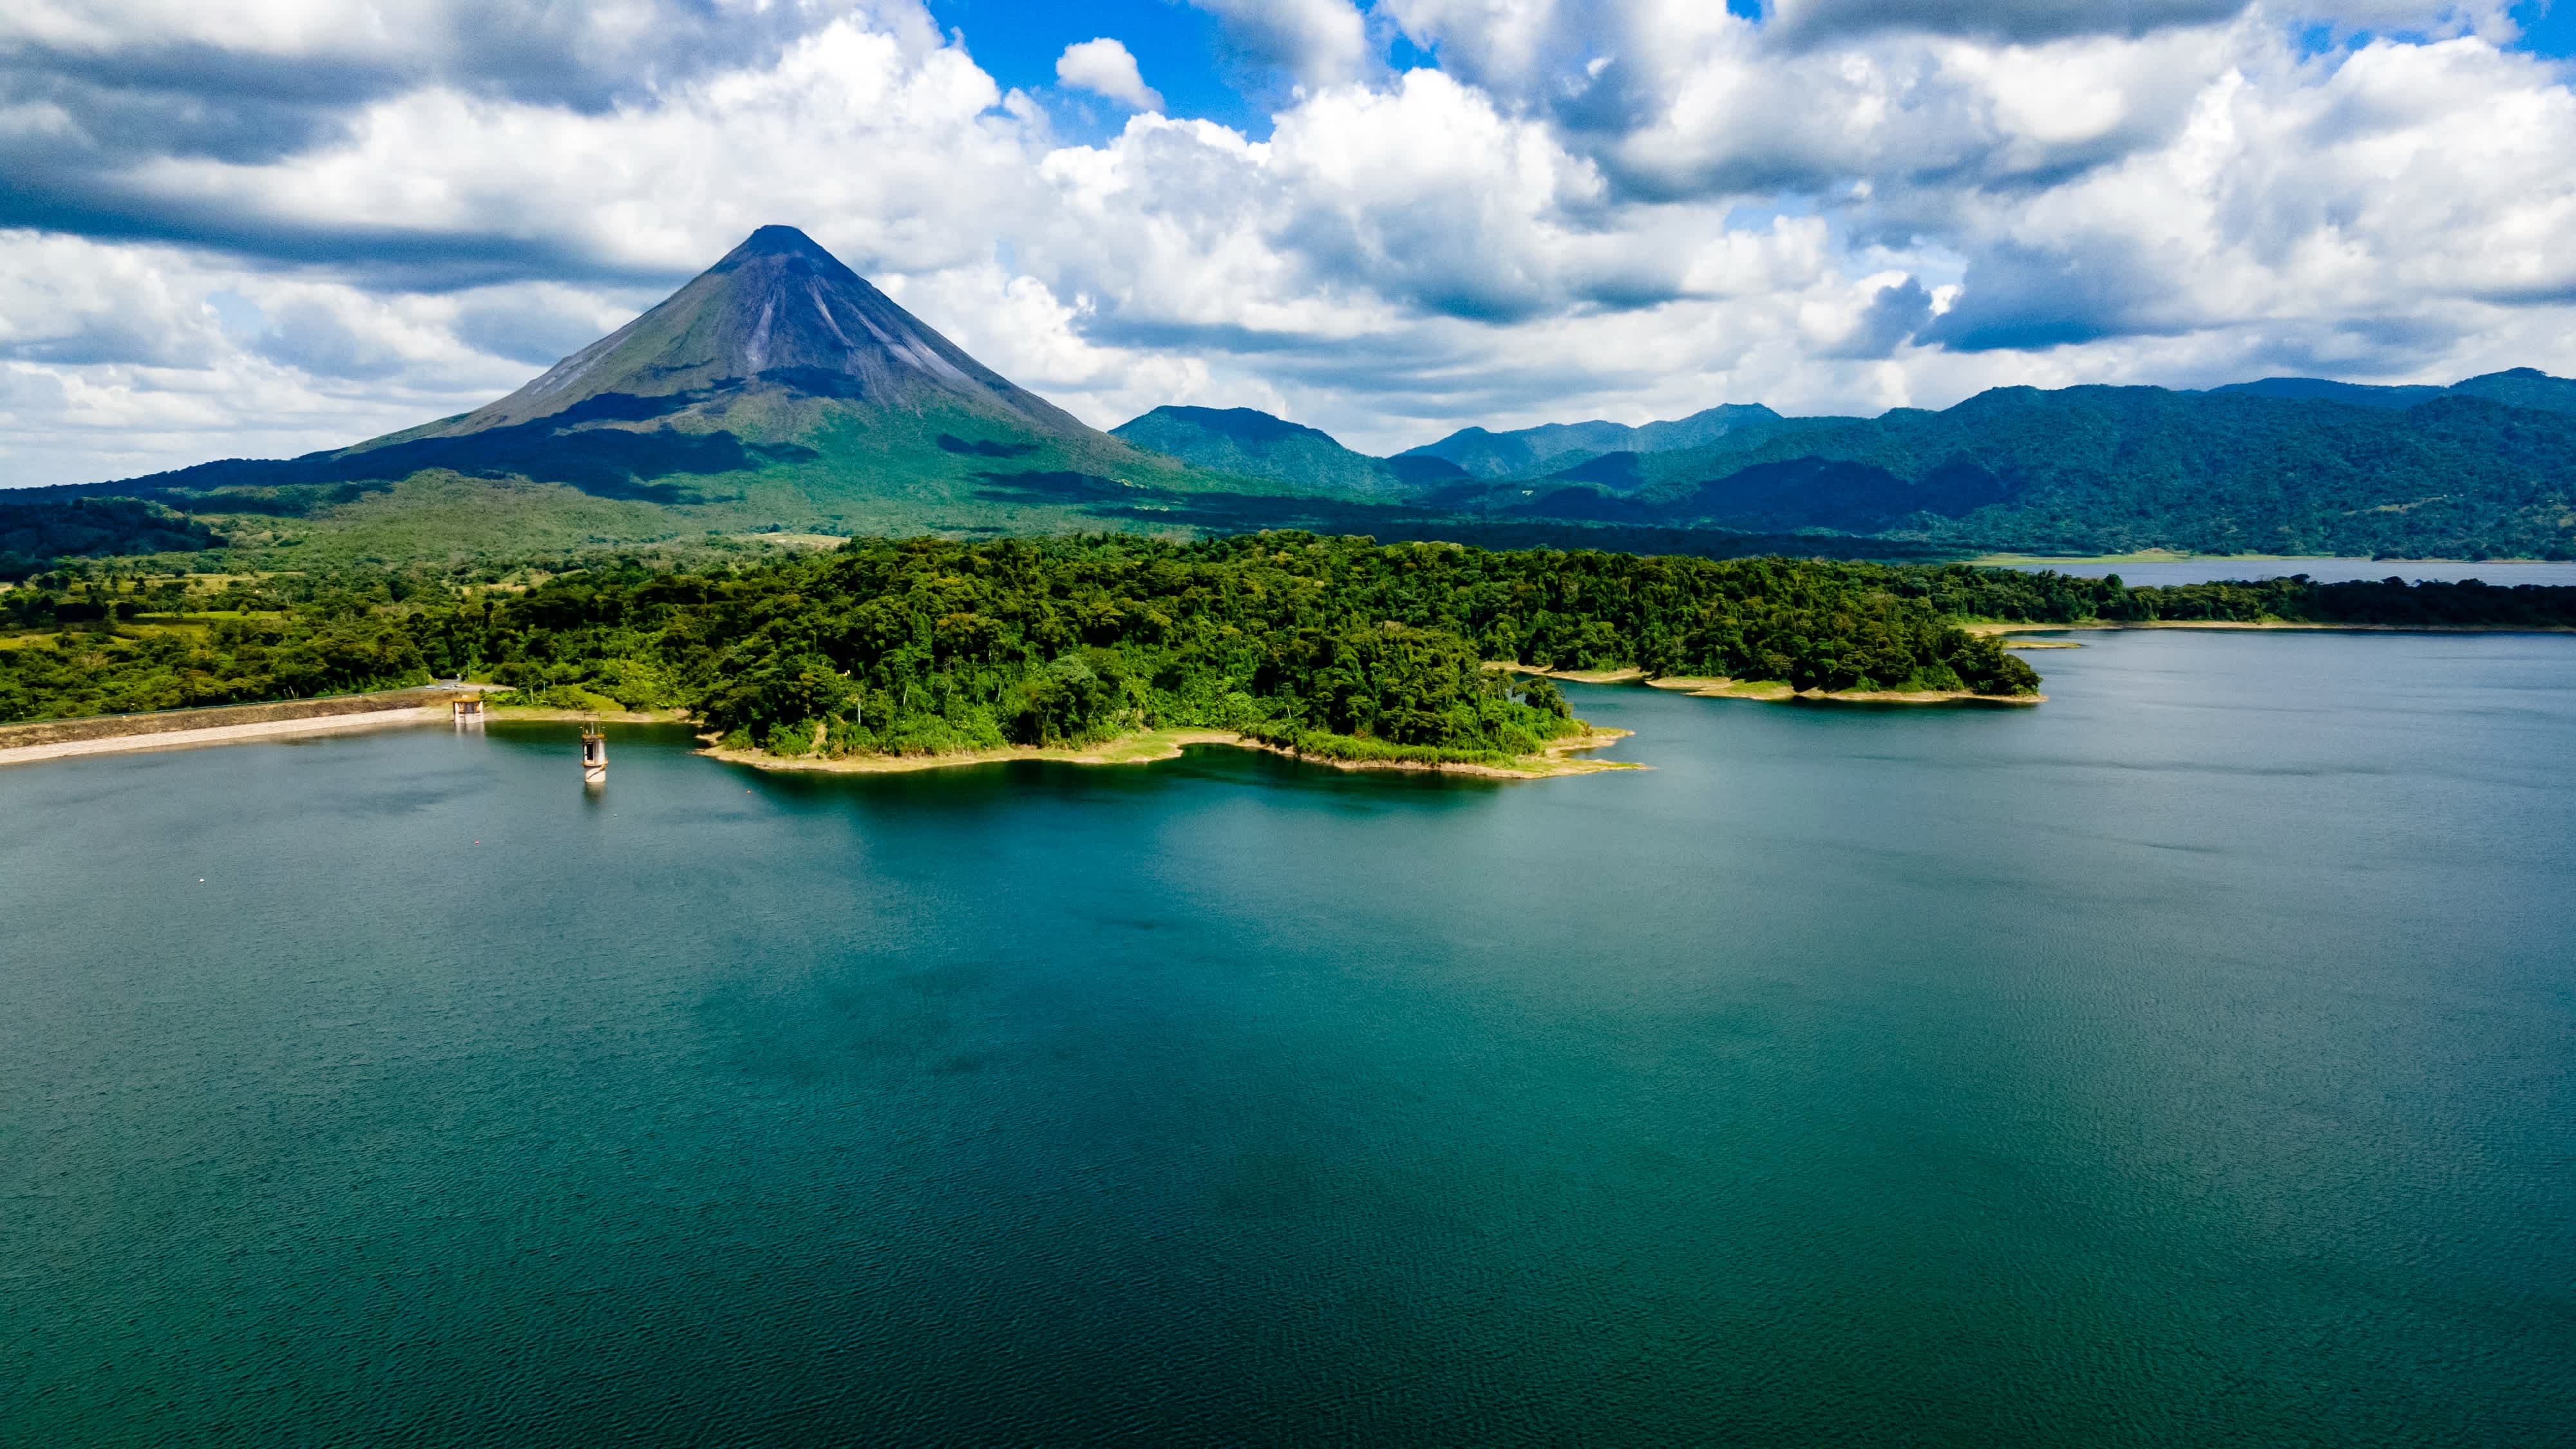 Panorama avec le volcan Arenal et le lac Arenal, Costa Rica.